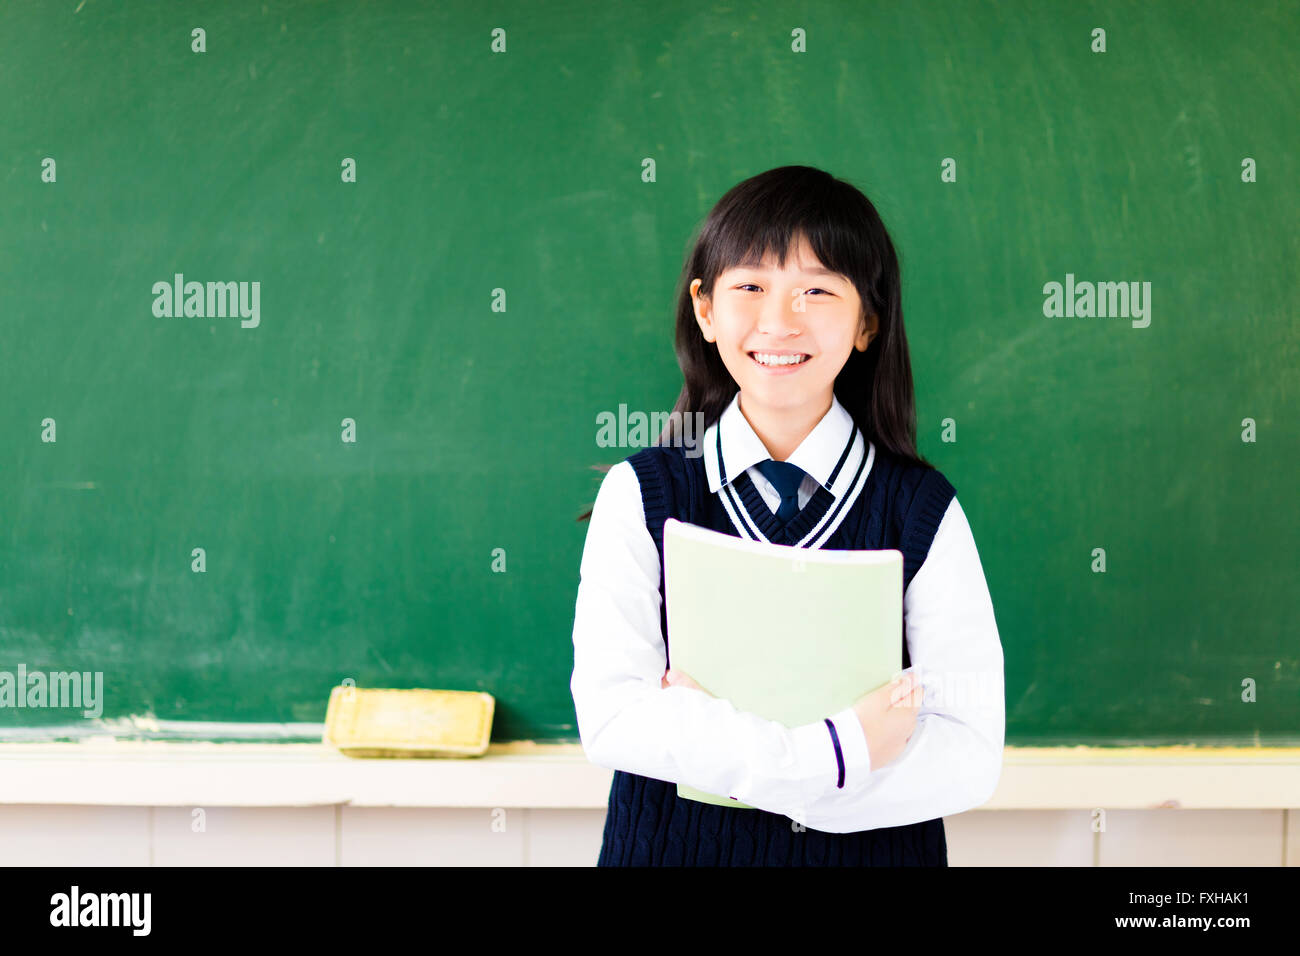 Happy student girl with book in classroom Banque D'Images